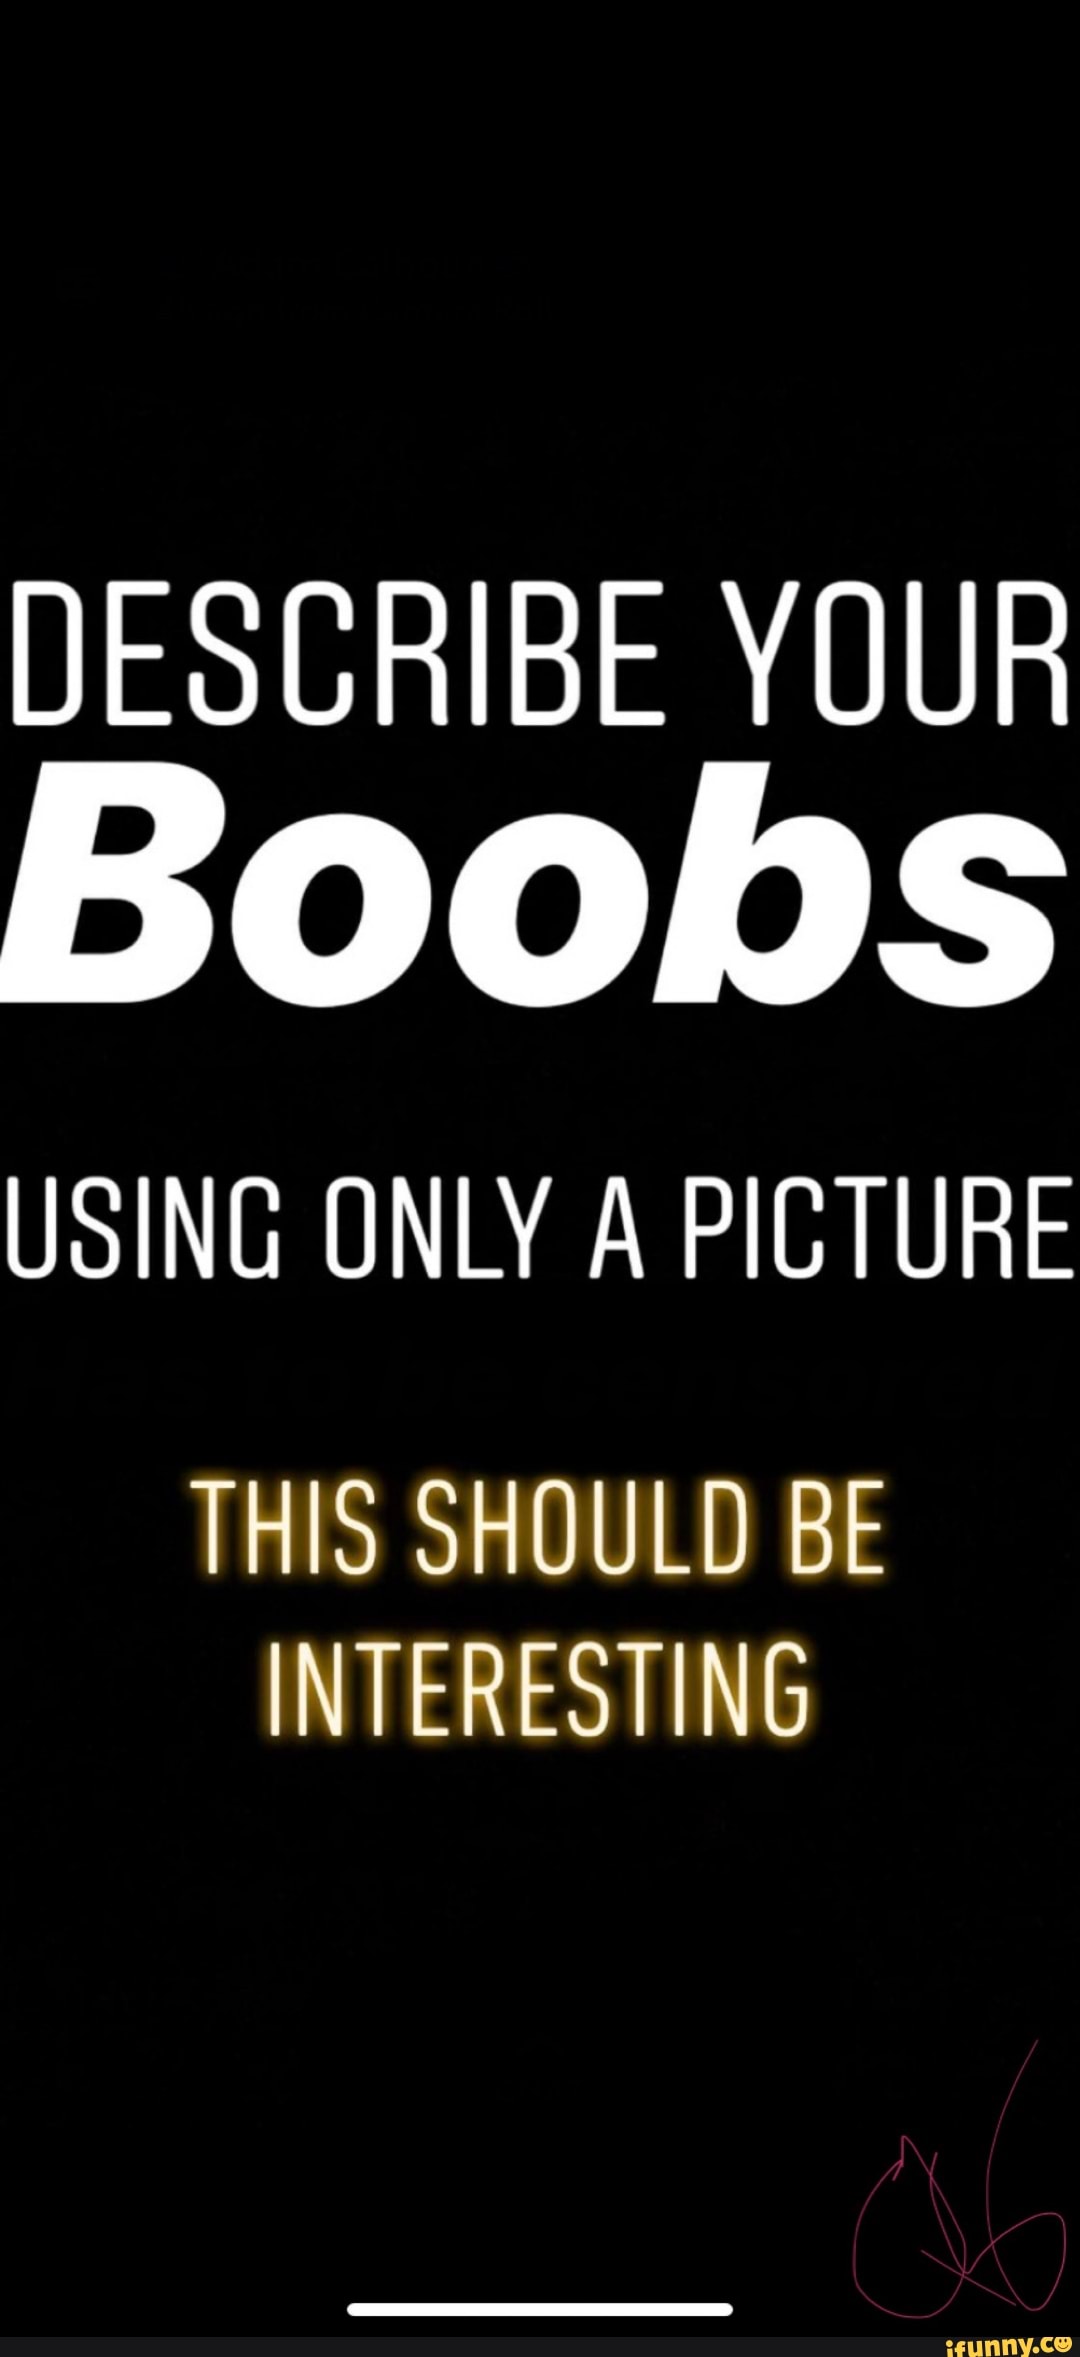 WHAT IS YOUR FAVORITE NICKNAME FOR BOOBS? - iFunny Brazil